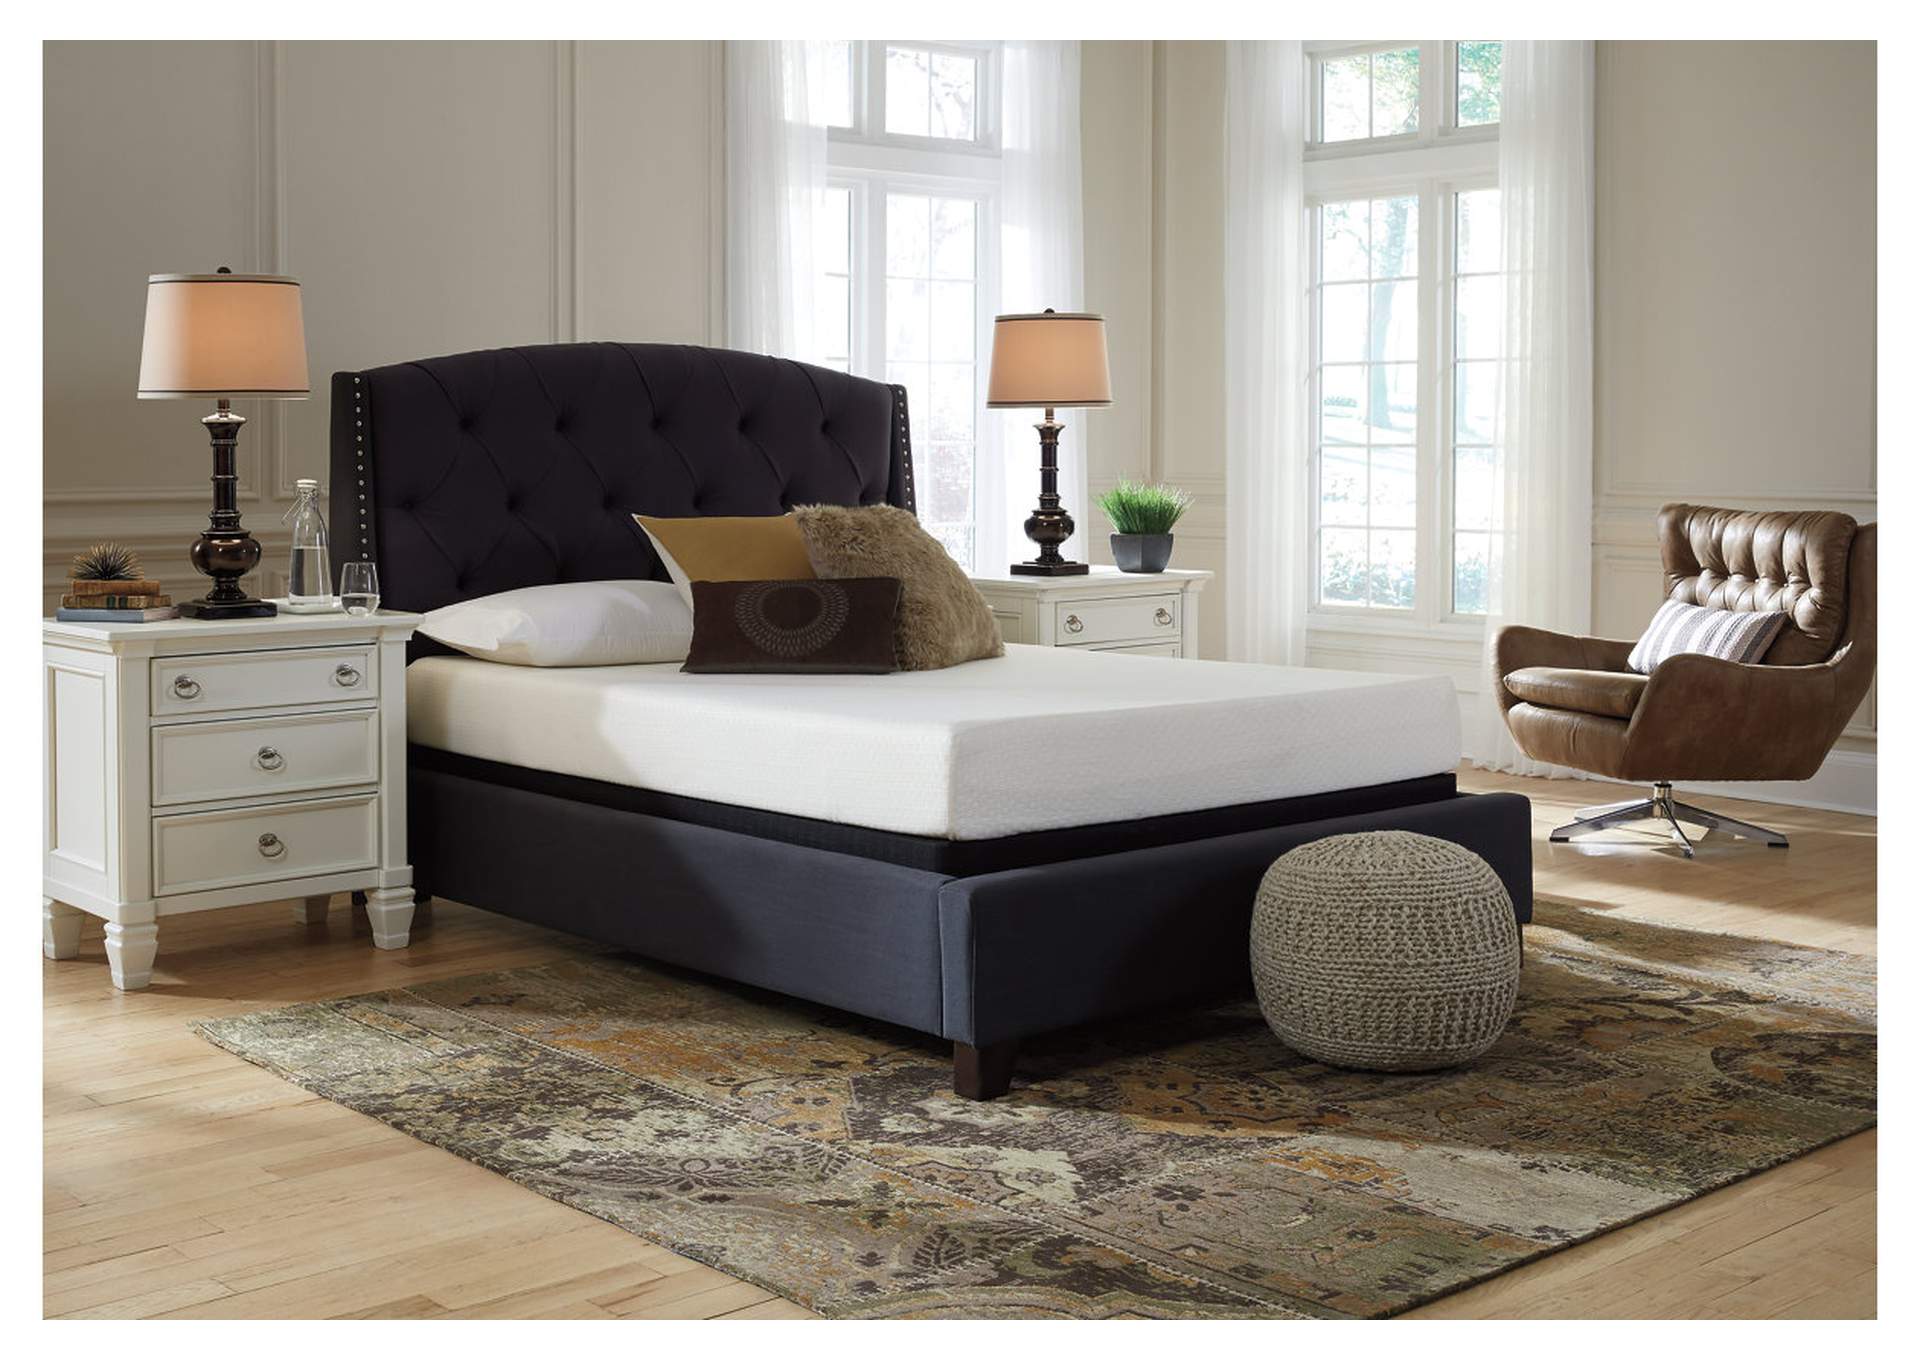 Chime 8 Inch Memory Foam Full Mattress in a Box,Direct To Consumer Express